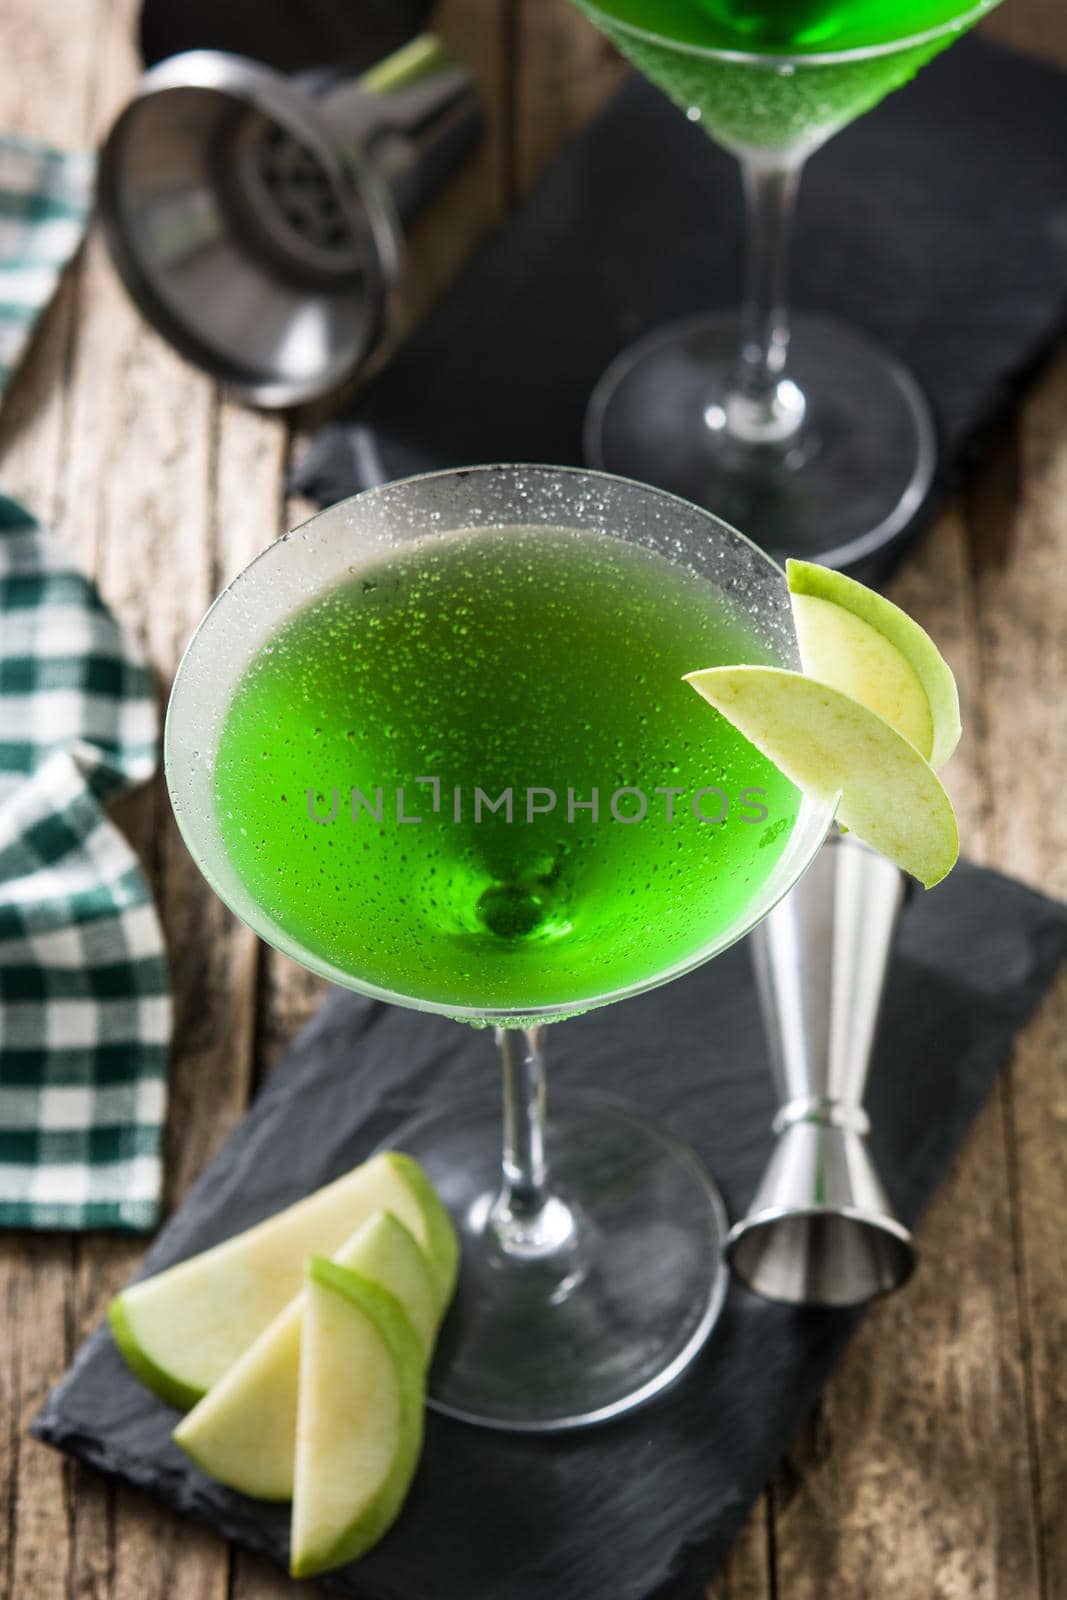 Green appletini cocktail by chandlervid85